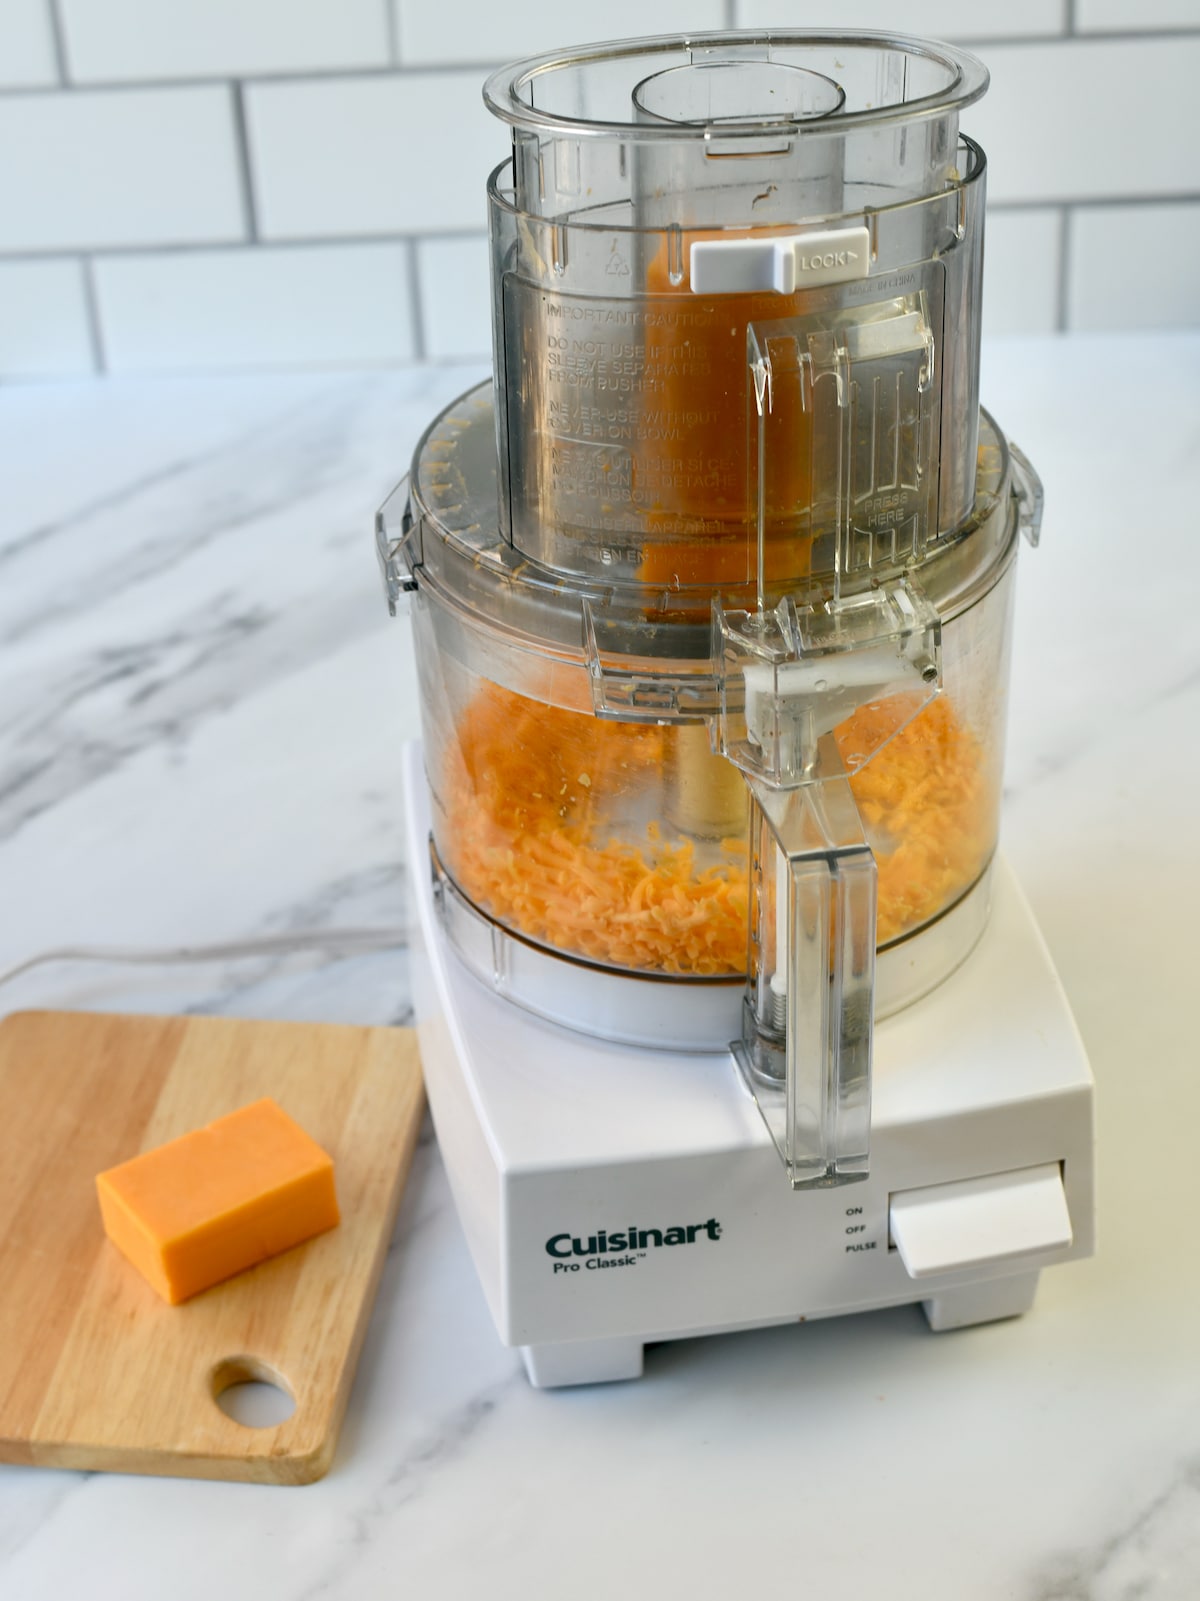 Cheese being shredded in a food processor.